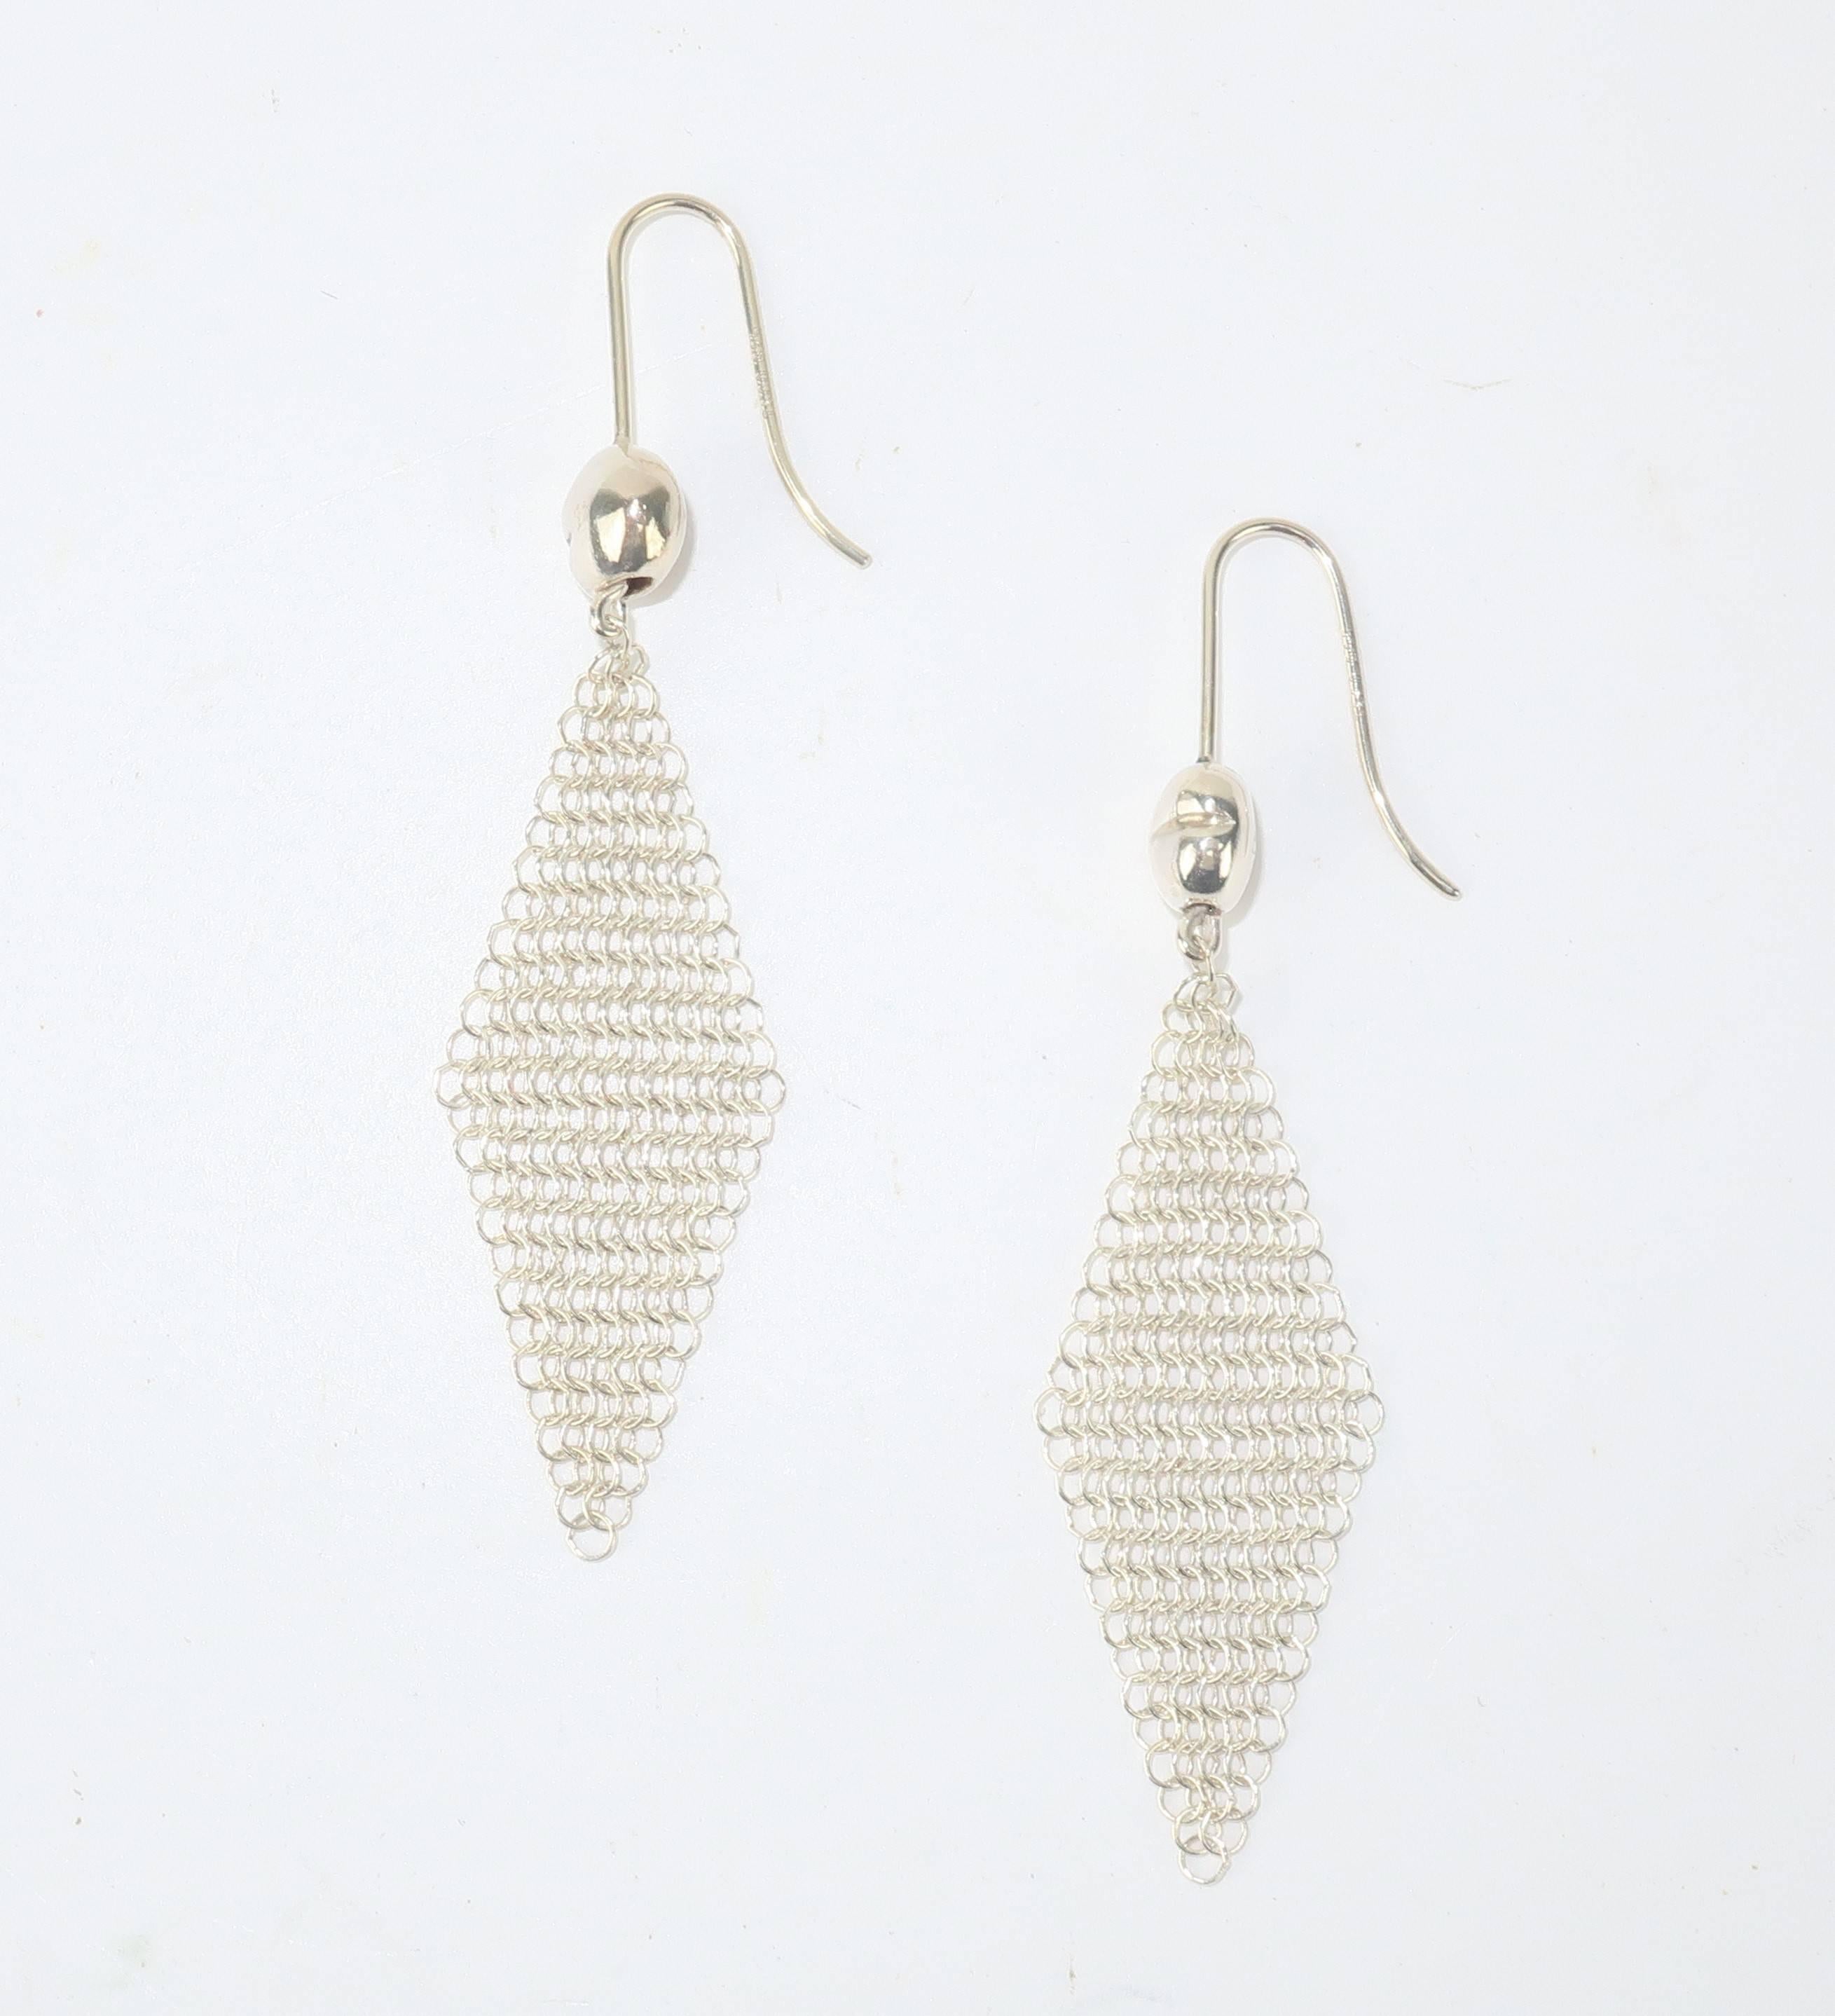 Elsa Peretti’s jewelry designs are as striking as the lady herself.  Her unique pieces for Tiffany & Co. are an artistic combination of organic forms and sculpture.  These 2” long sterling silver ‘mini’ mesh earrings have an iconic Peretti bean